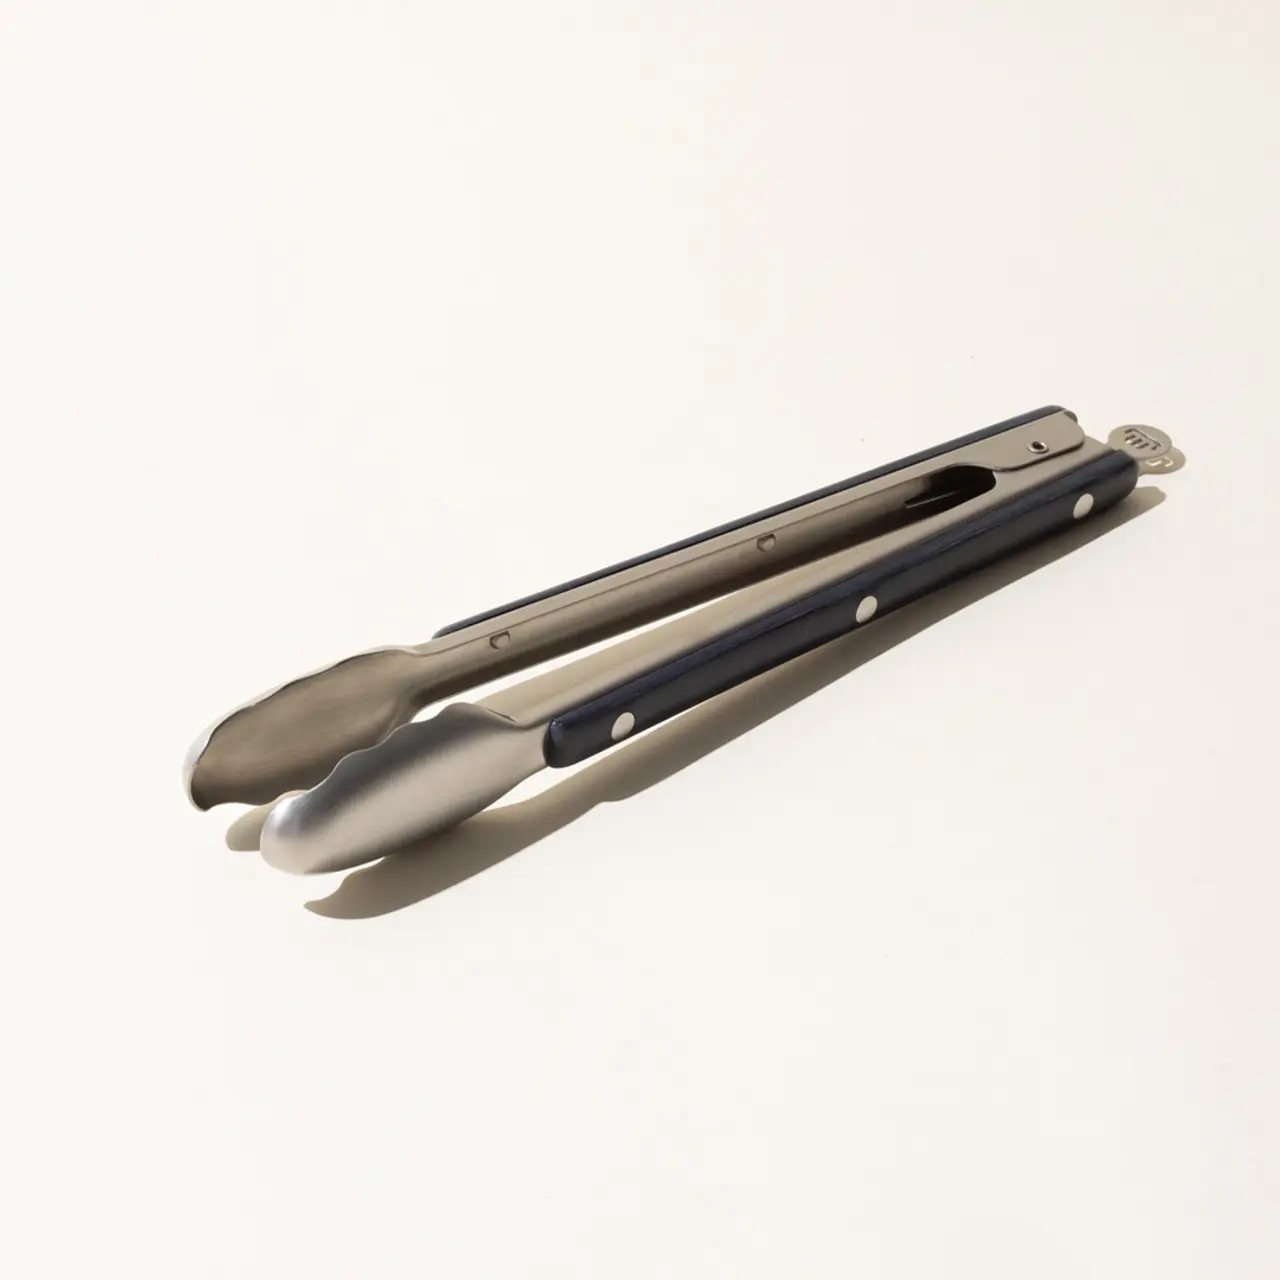 A closed multi-tool pocket knife with pliers on one end, lying on a plain light background.